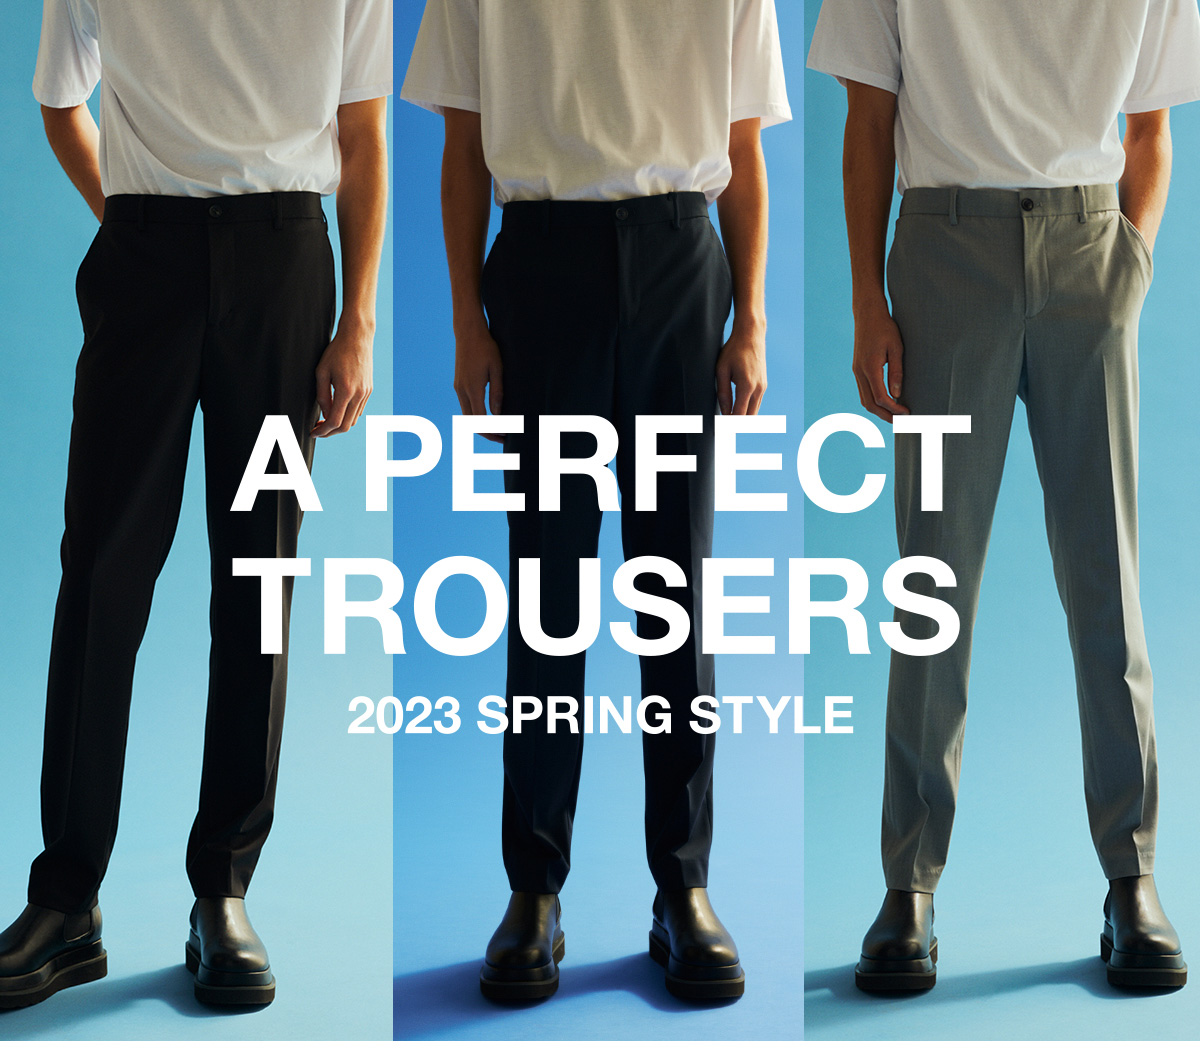 A PERFECT TROUSERS 2023 SPRING STYLE